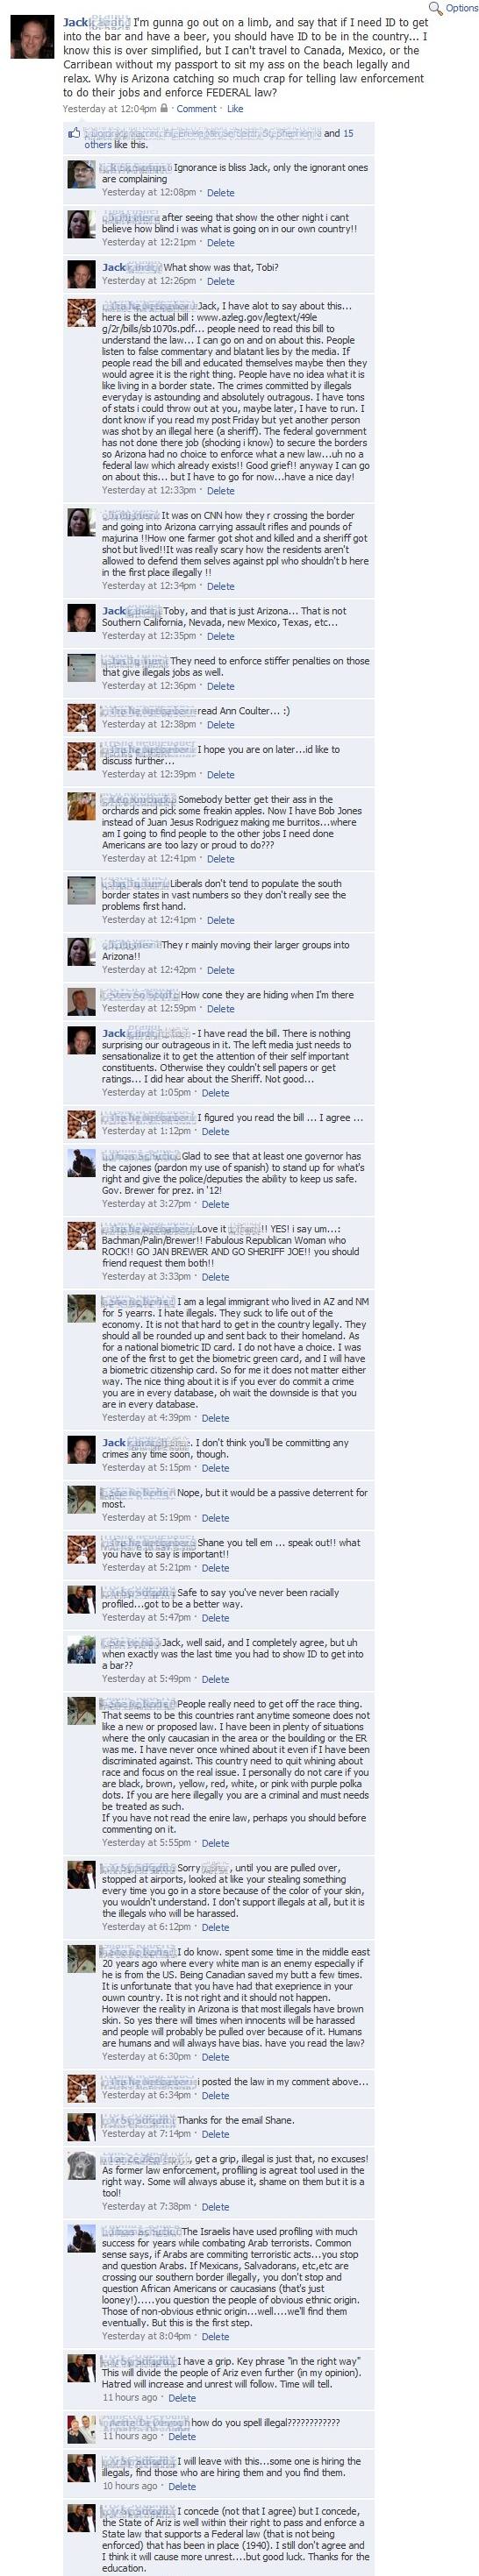 Arizona Immigration Law, a spirited debate on my Facebook wall.